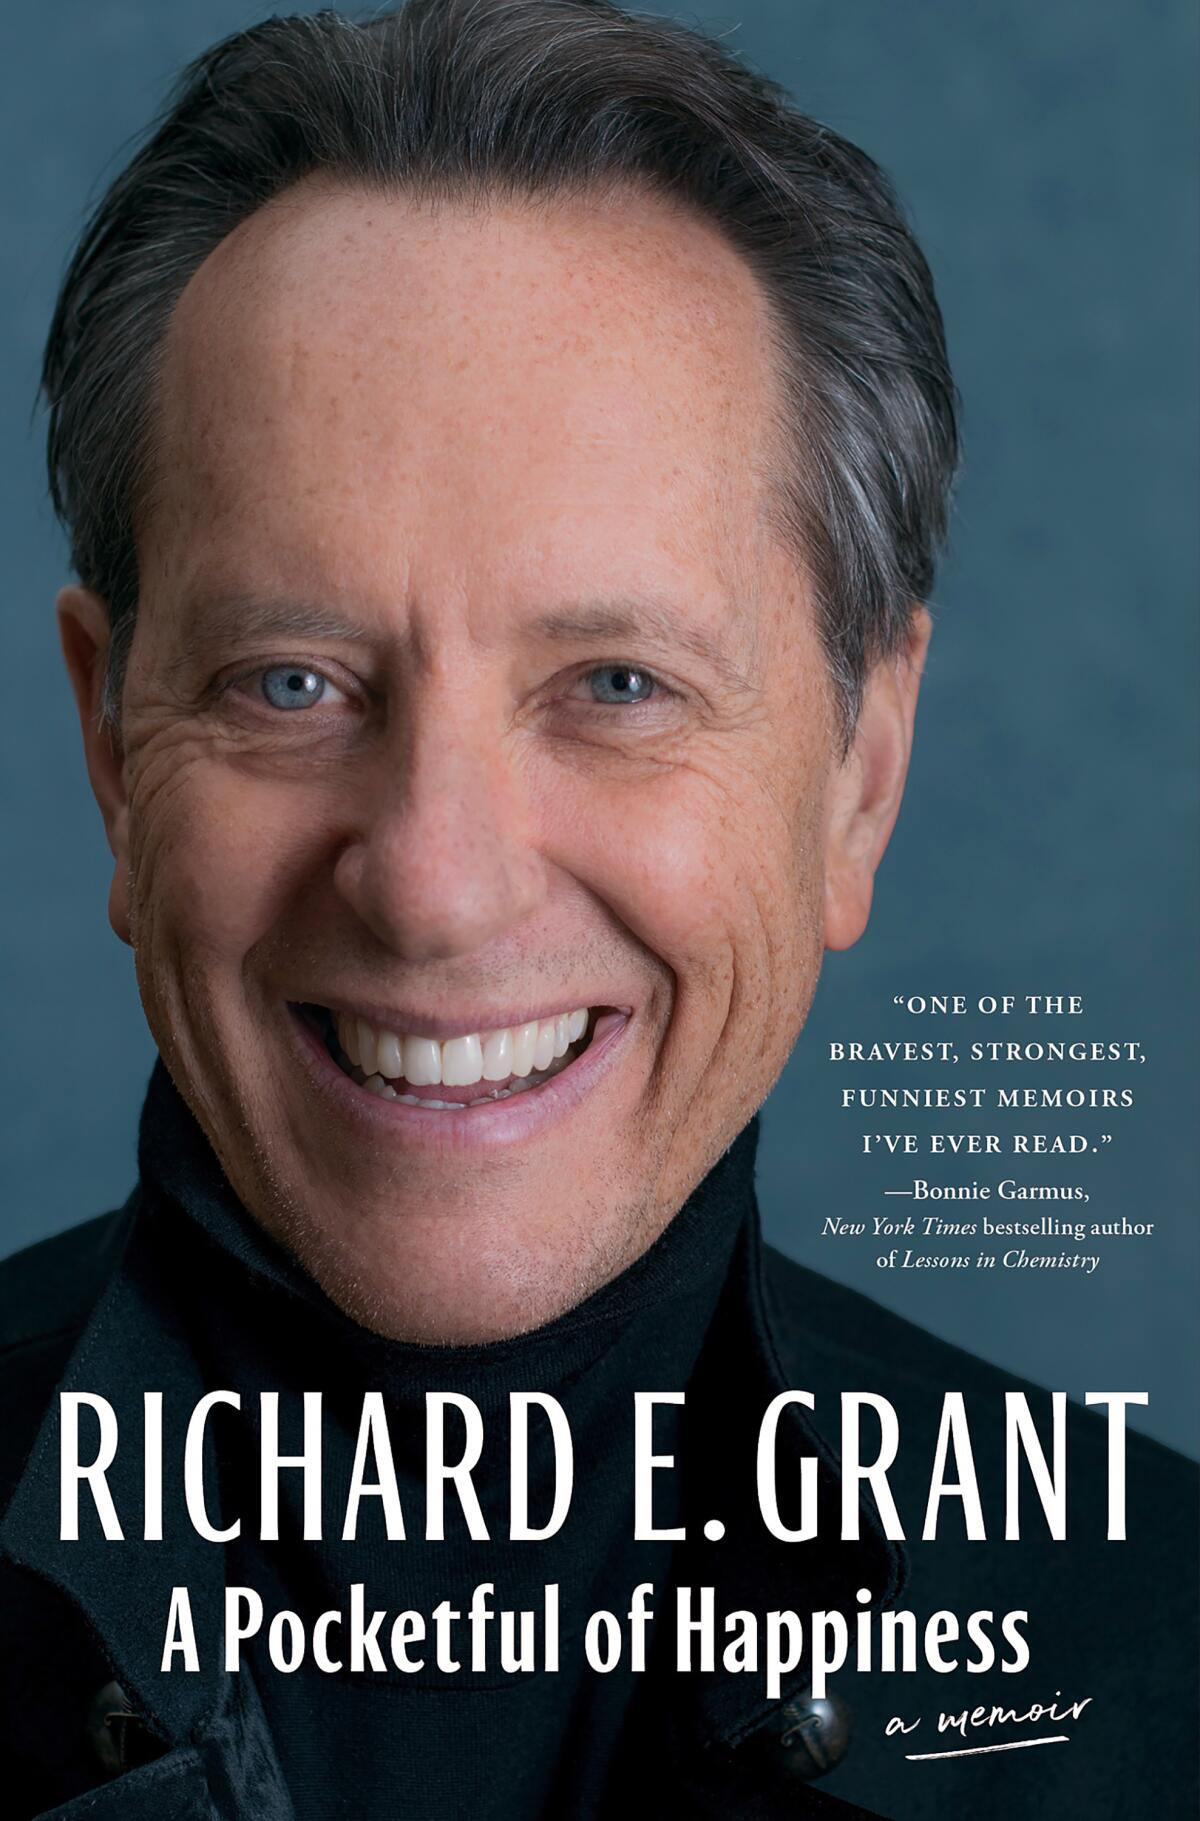 "A Pocketful of Happiness" by Richard E. Grant